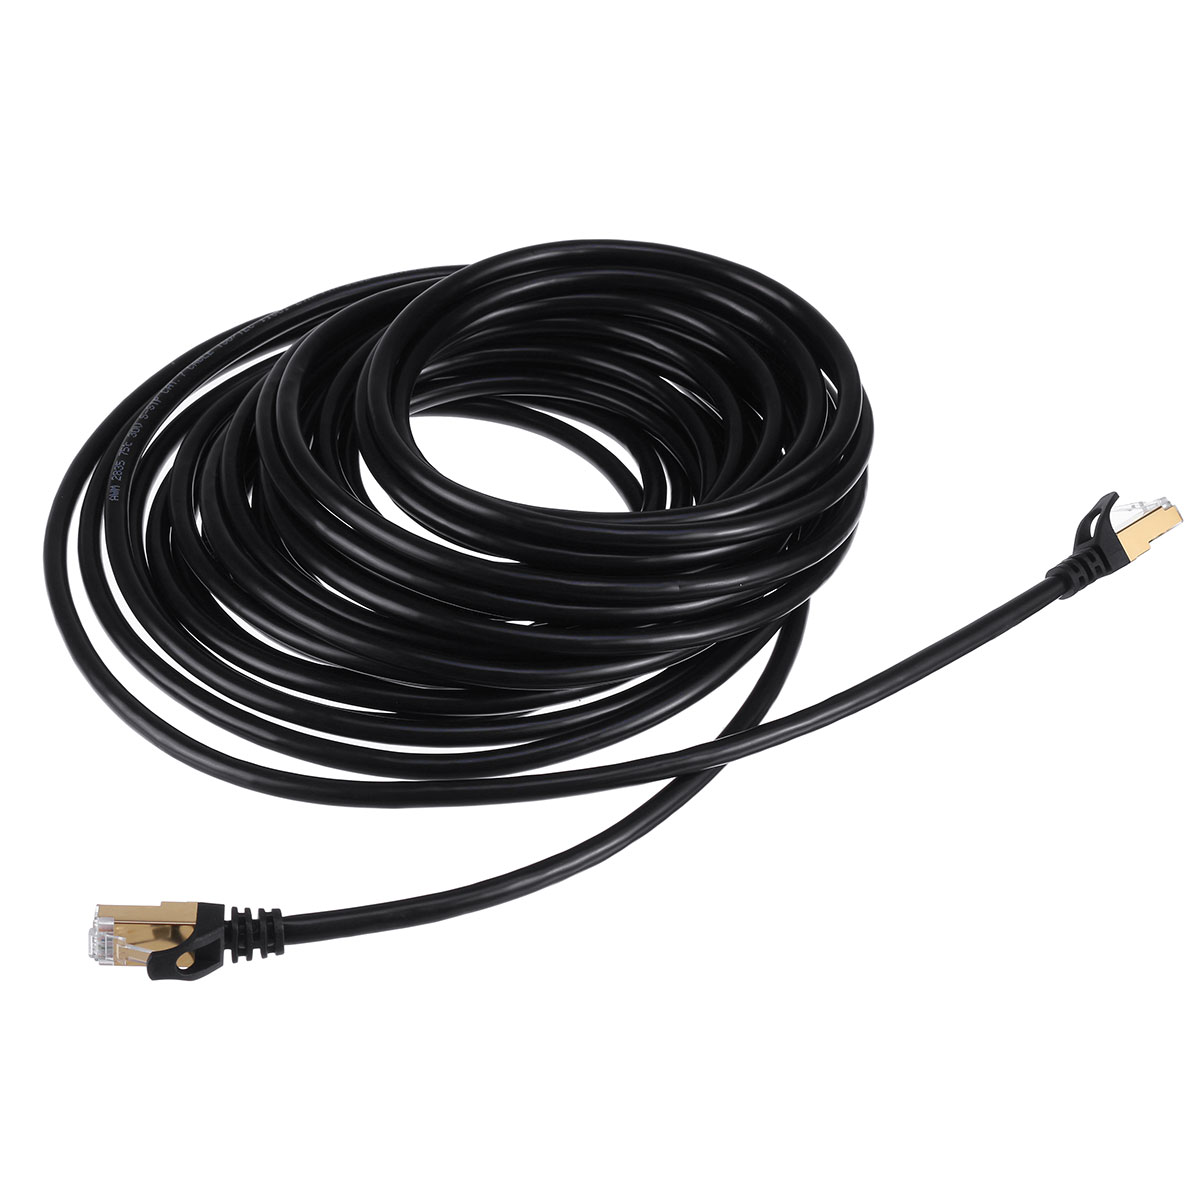 Black-Cat7-28AWG-High-Speed-Pure-Copper-Core-Networking-Cable-Cat7-Cable-LAN-Network-RJ45-Patch-Cord-1621196-6